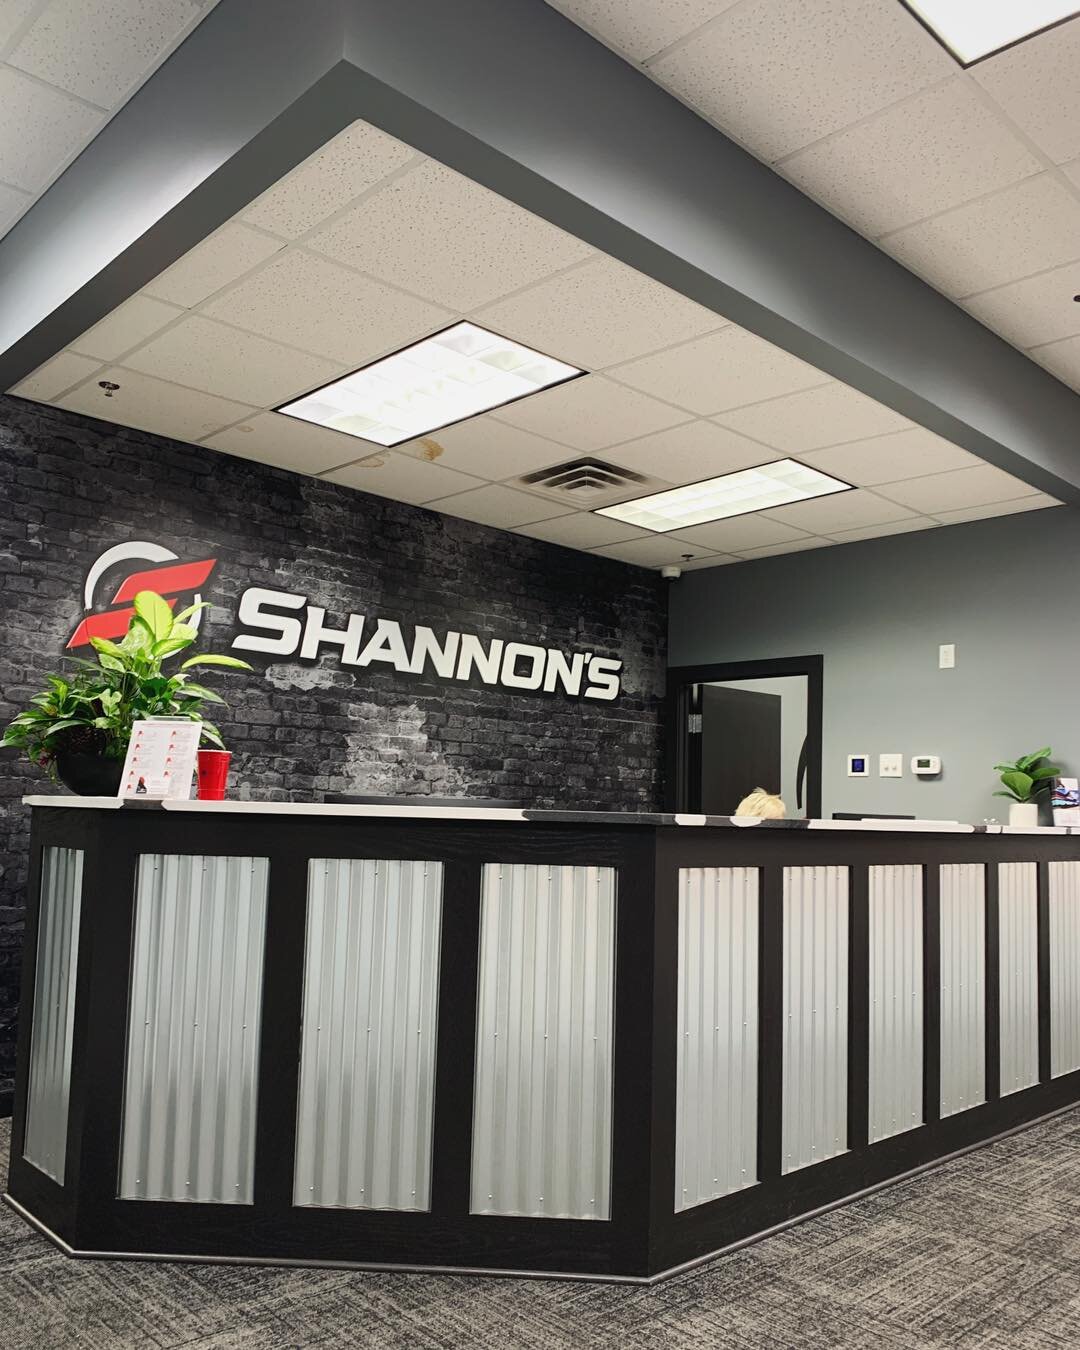 After and Before with our friends at Shannon's Auto Body, Inc. Quality work for people who also do quality work. 
#AllWaysPainting #QualityAllWays